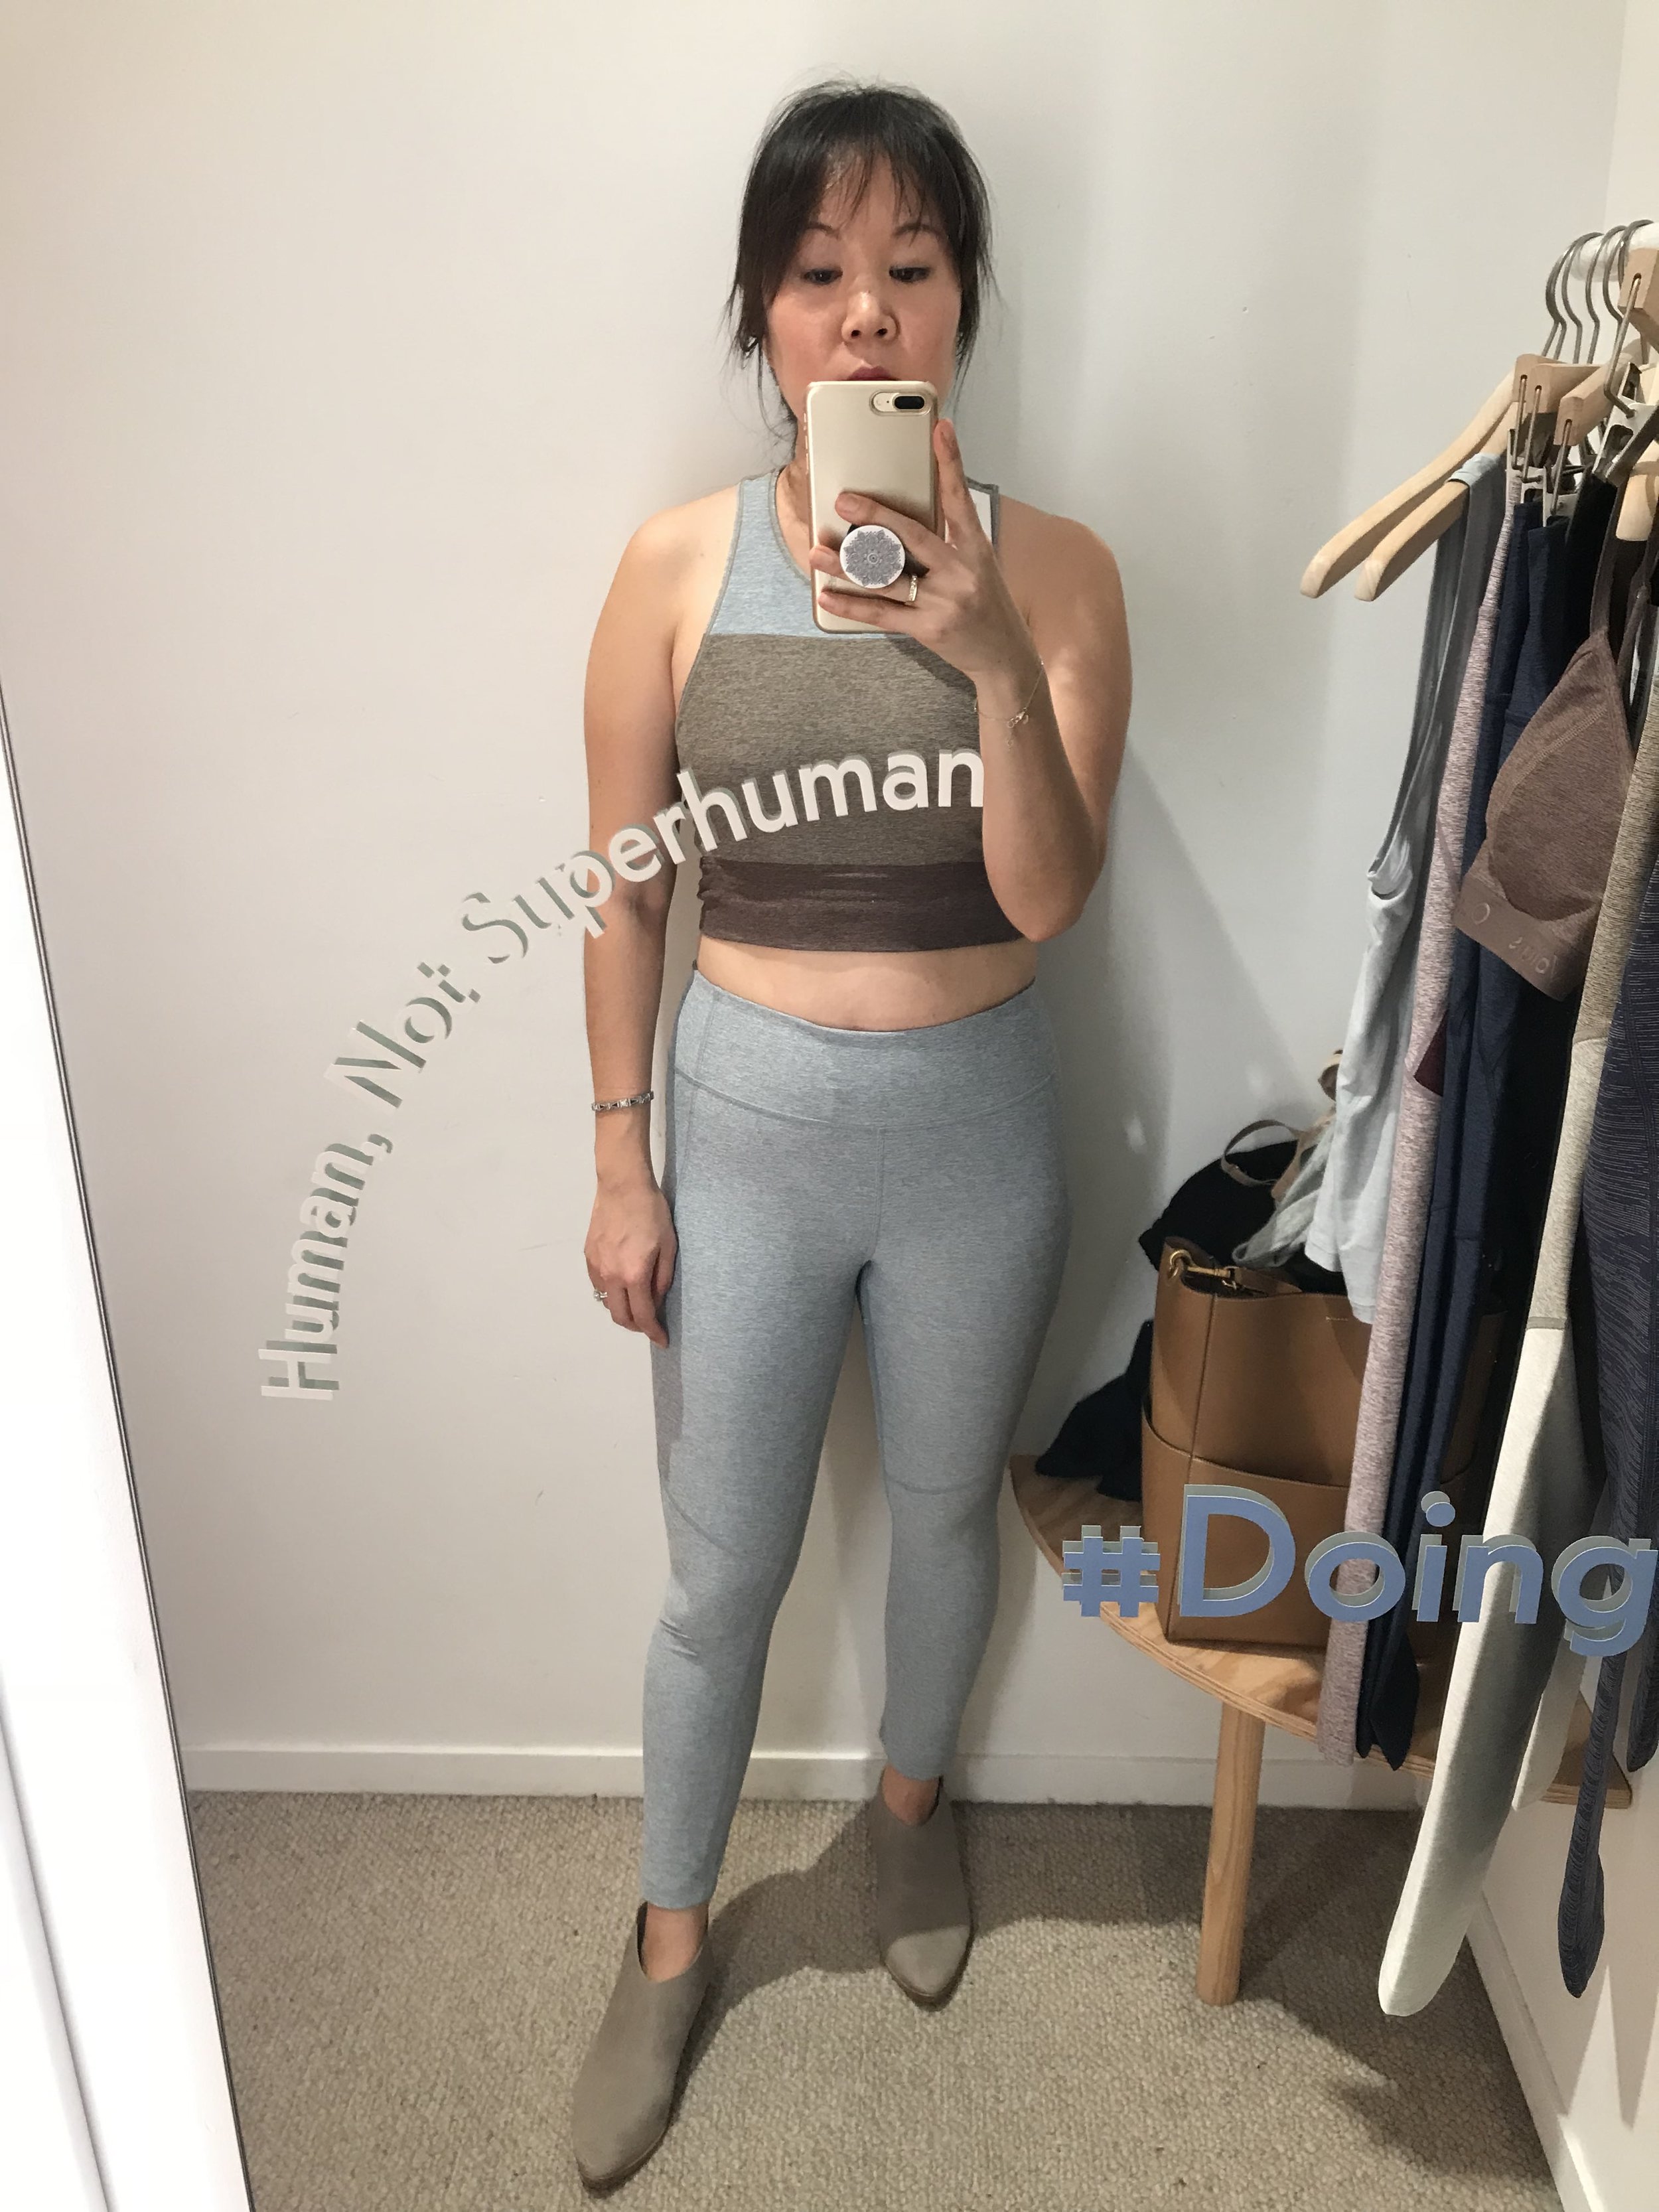 outdoor voices or lululemon \u003e Up to 65 